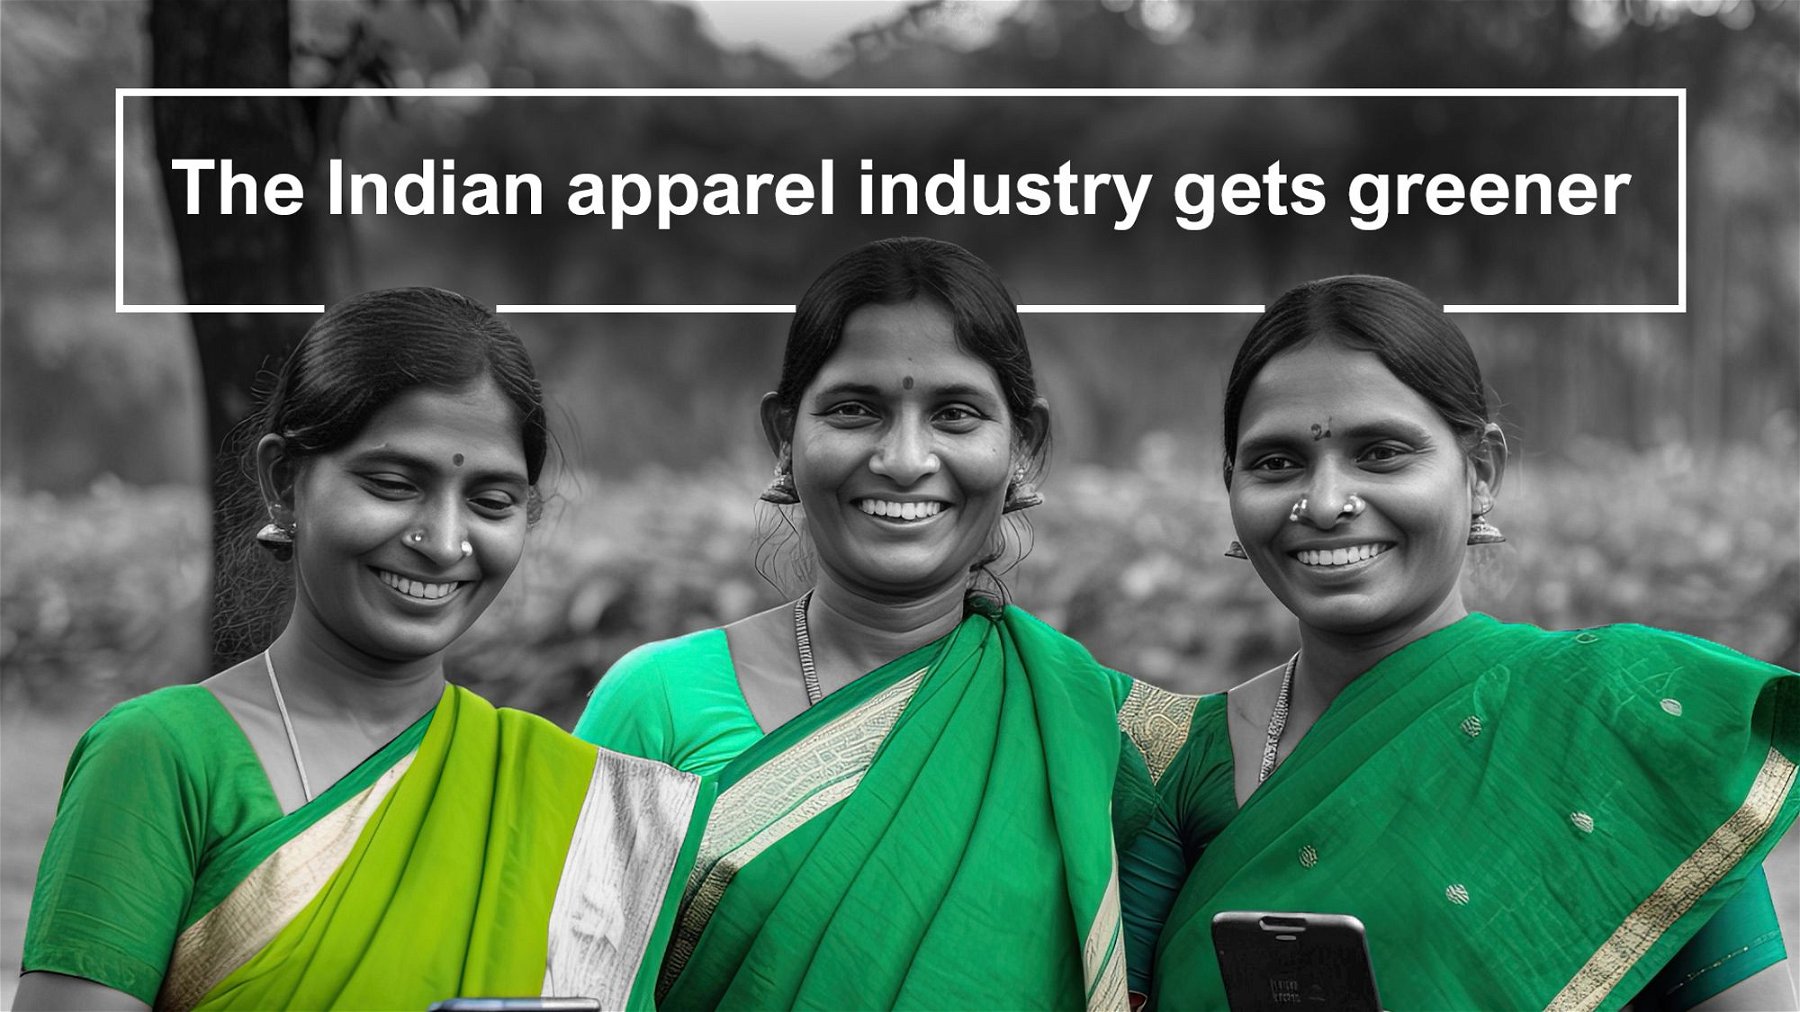 The Indian apparel industry to get greener